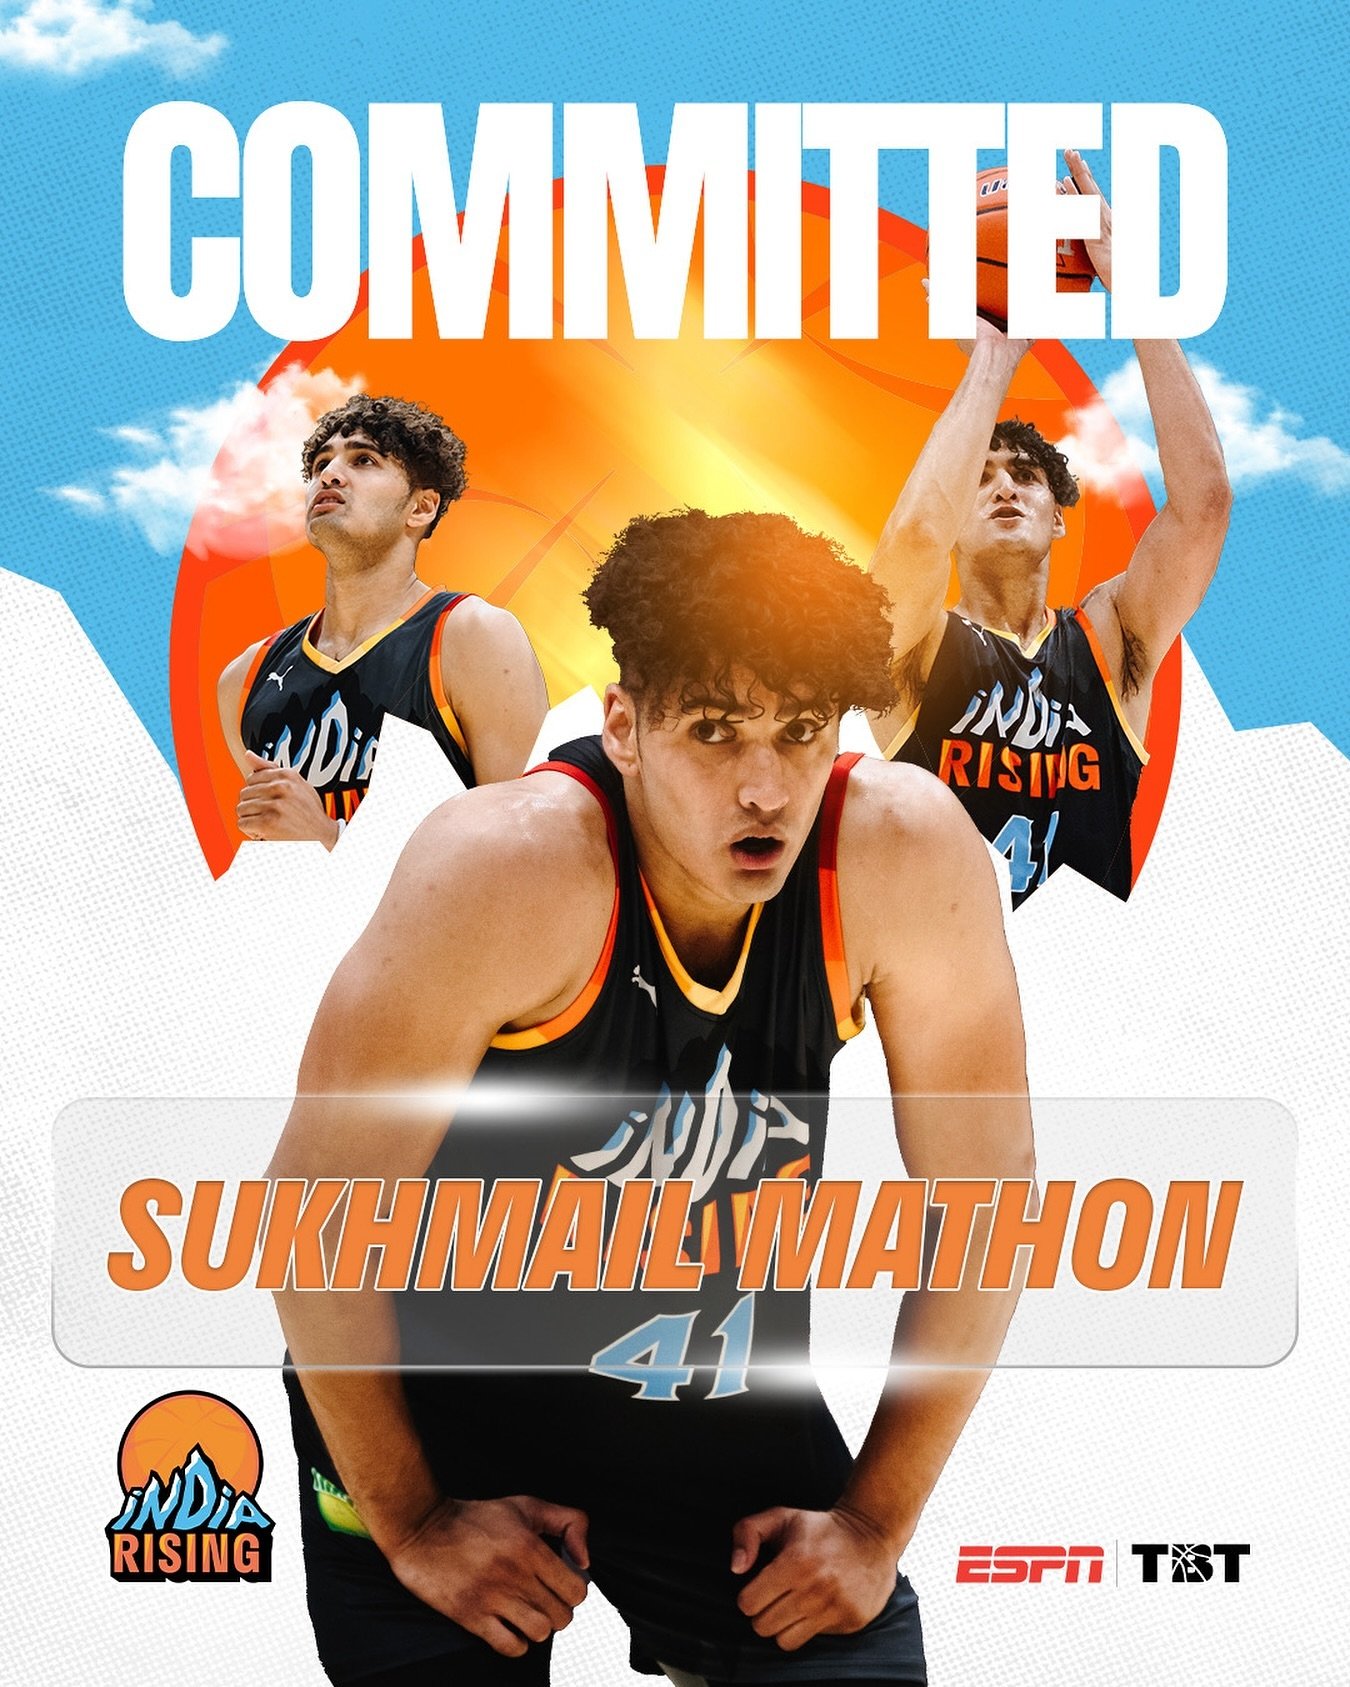 @smathon123 is back with India Rising for the $1M @the.tournament this summer. Fresh off a historic season in the National Basketball League @basketballnymburk @fibaeuropecup for the Czech Republic, Sukh is ready to dominate the paint on both ends of